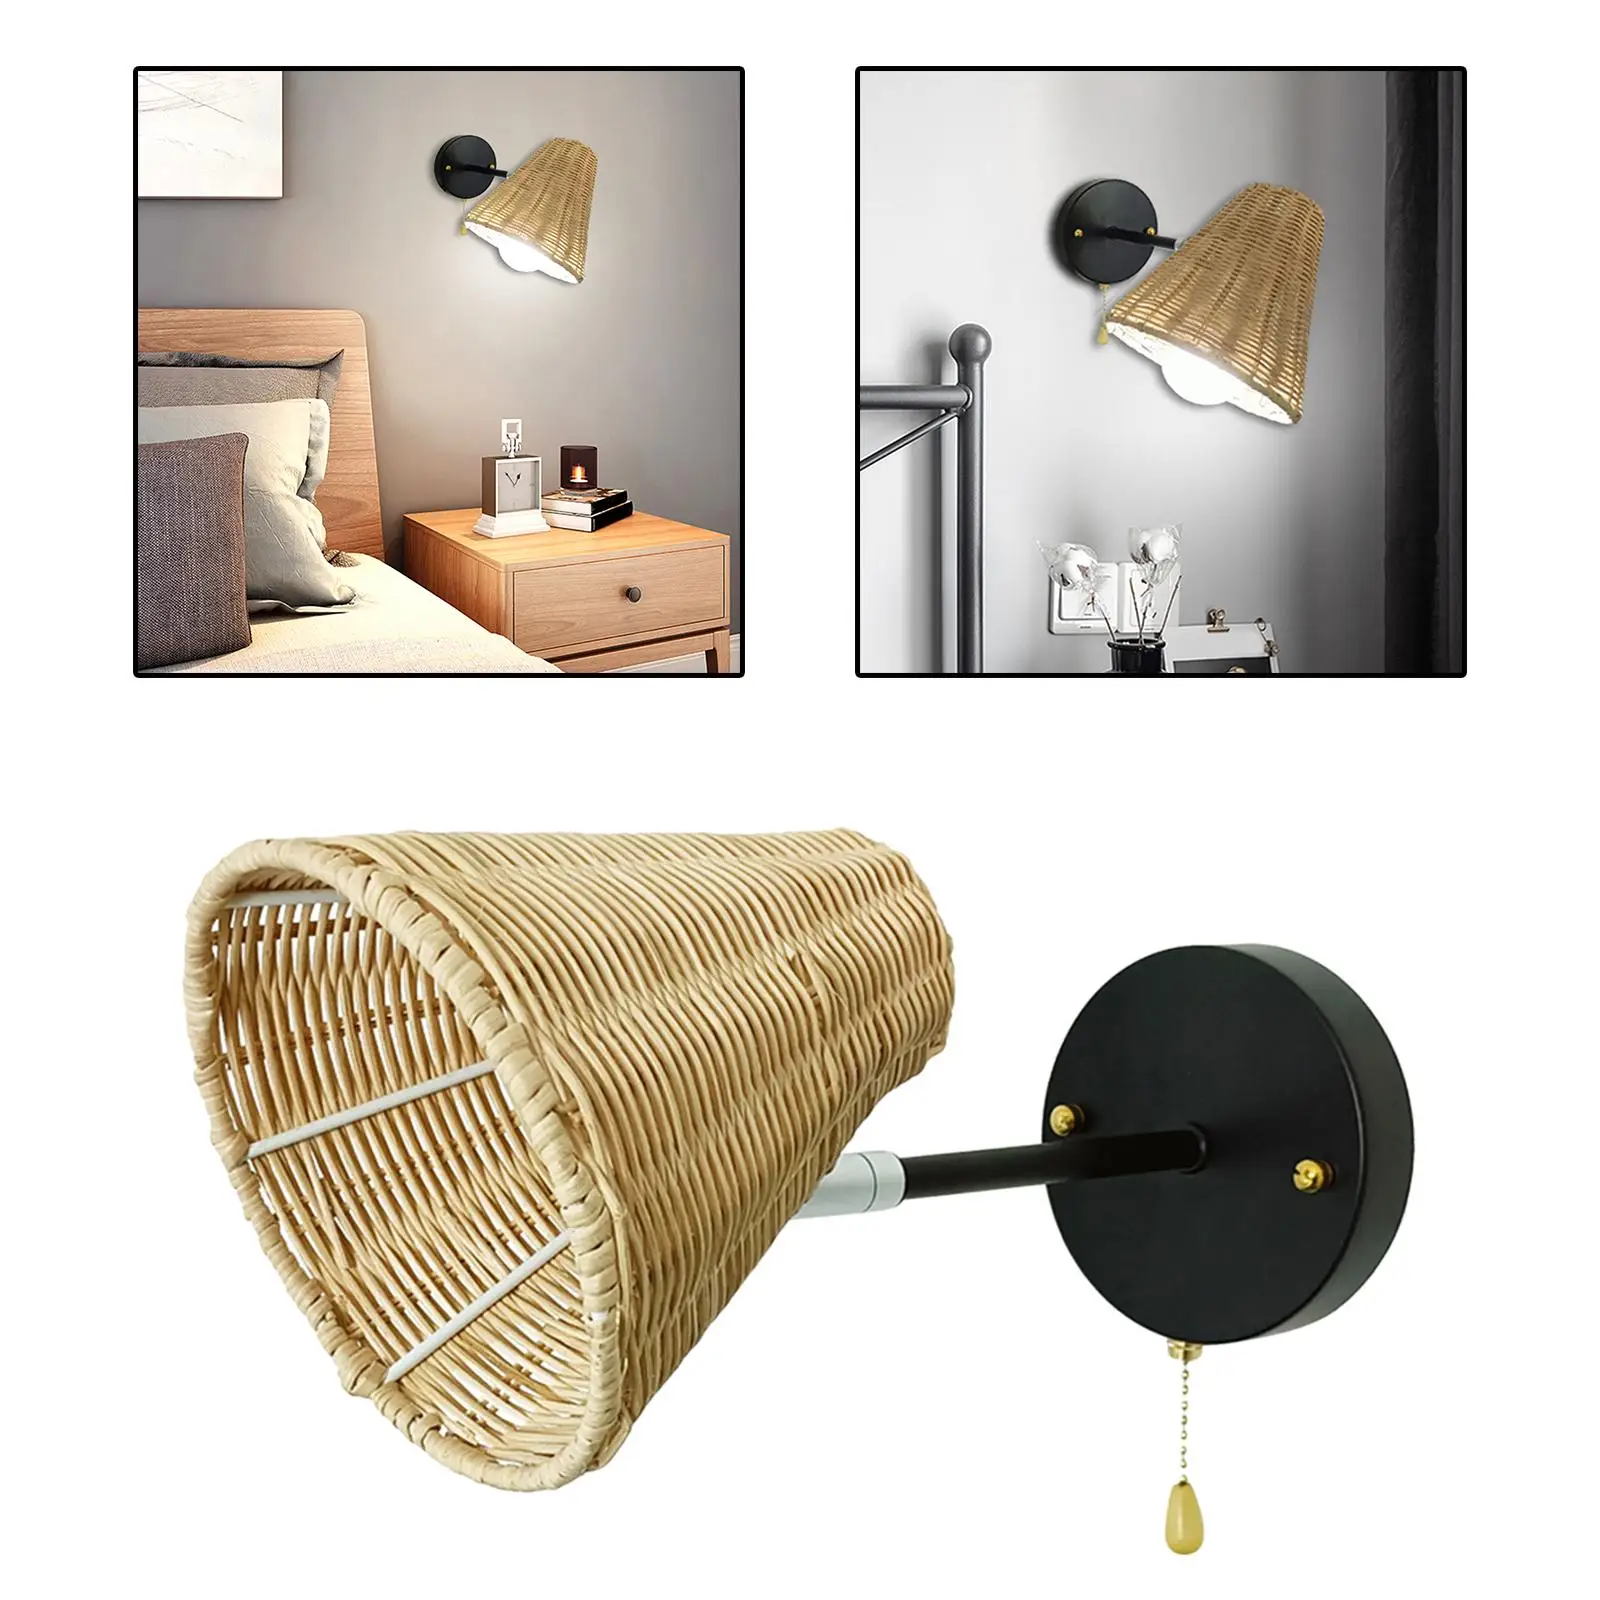 Retro Rattan Wall Lamp Light Sconce Adjustable with Pull Cord Switch E27 Lighting Fixture for Hallway Bedside Bathroom Bedroom